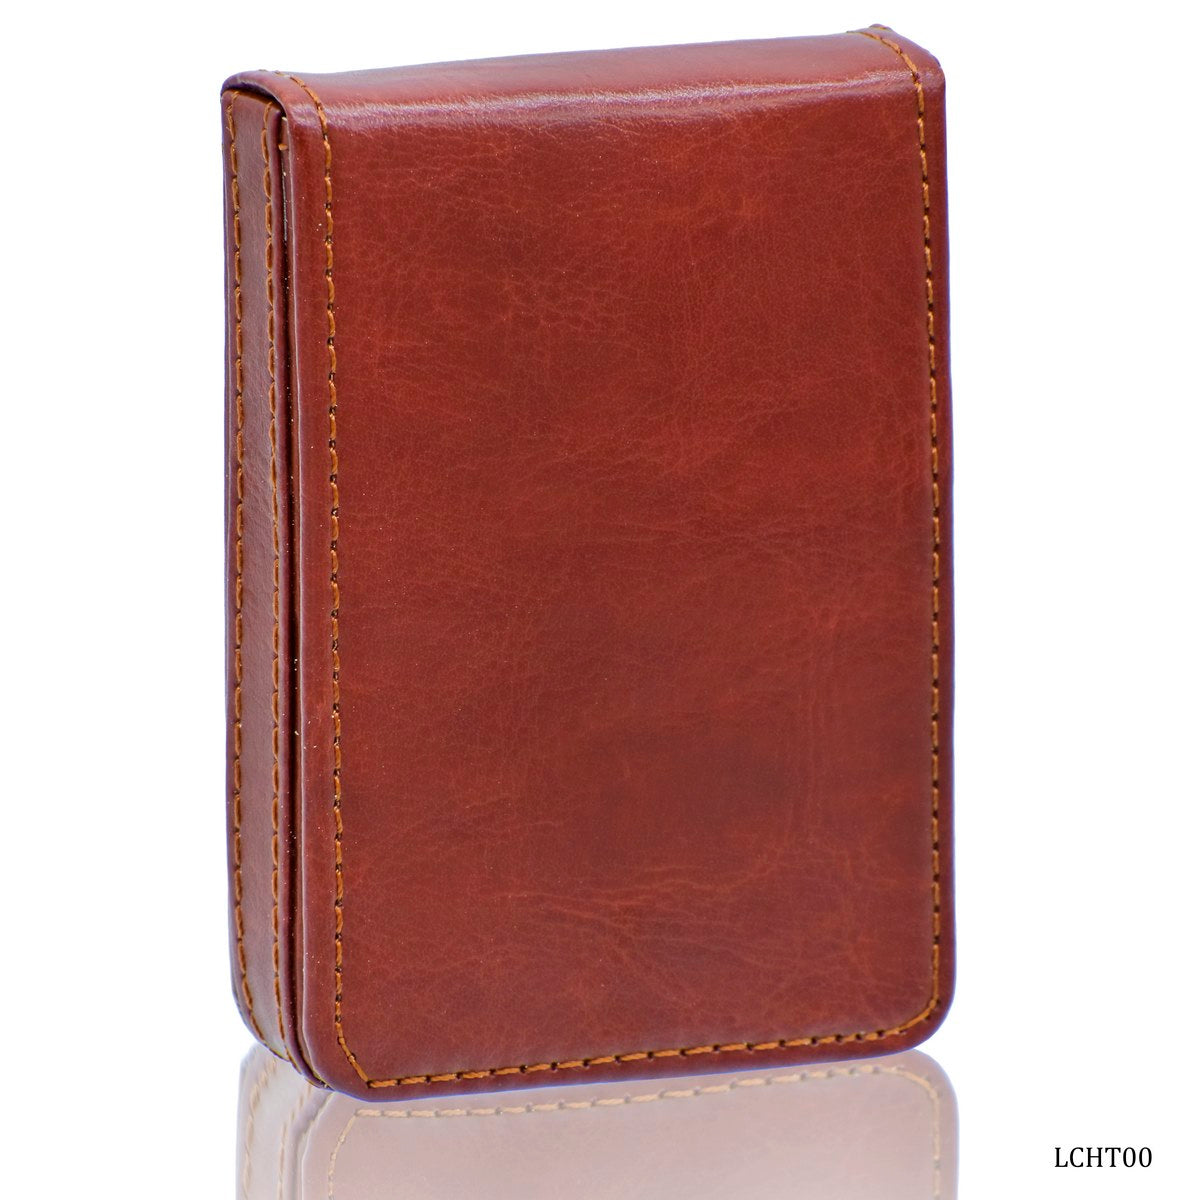 Vertical Leather Top Open Tan Business Card Holder - For Corporate Gifting, Event Gifting, Freebies, Promotions JALCHT00